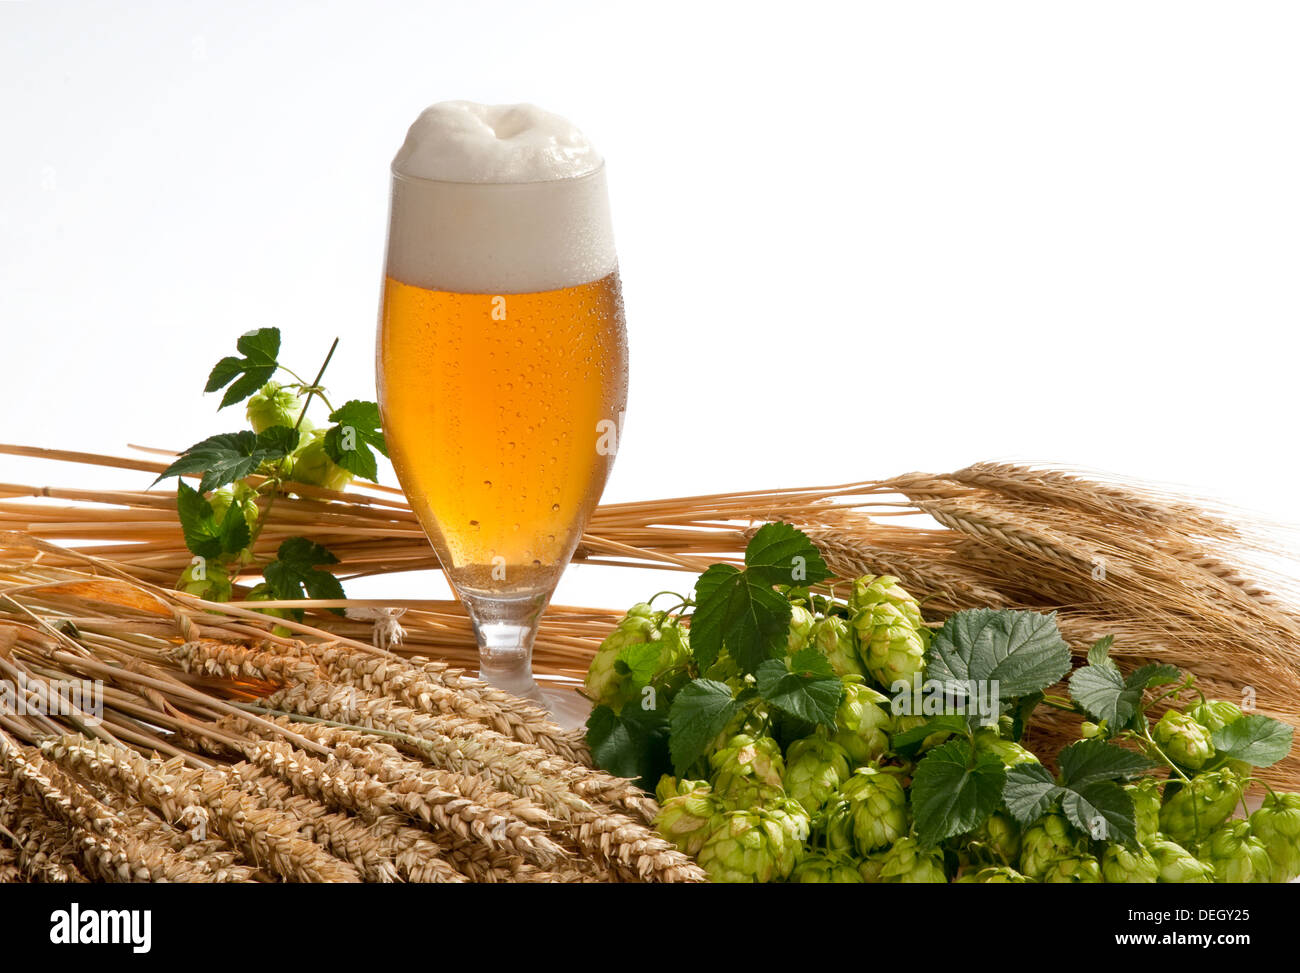 beer and raw material for beer production Stock Photo